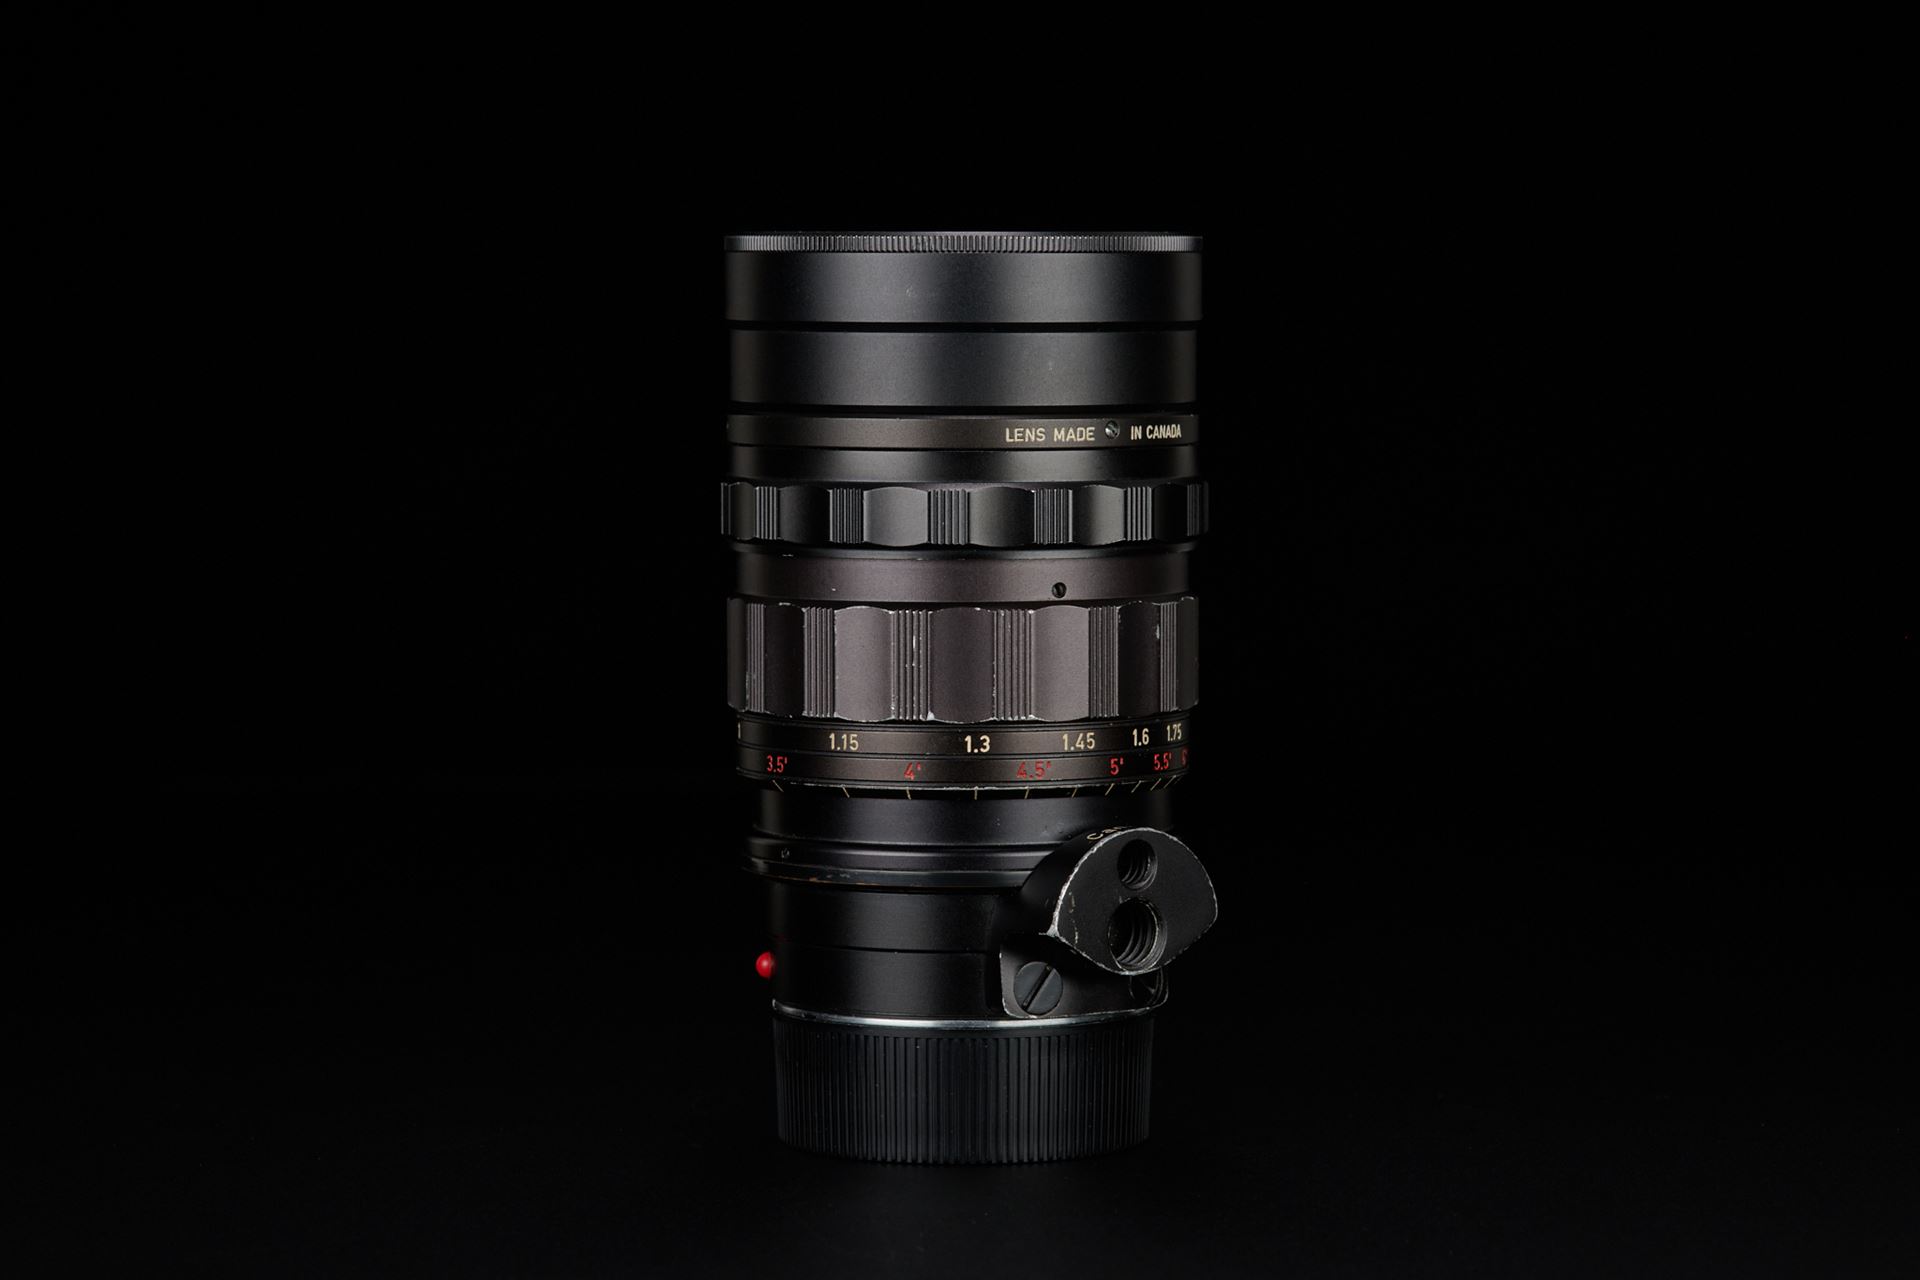 Picture of Leica Summicron-M 90mm f/2 Black Paint Ver.1